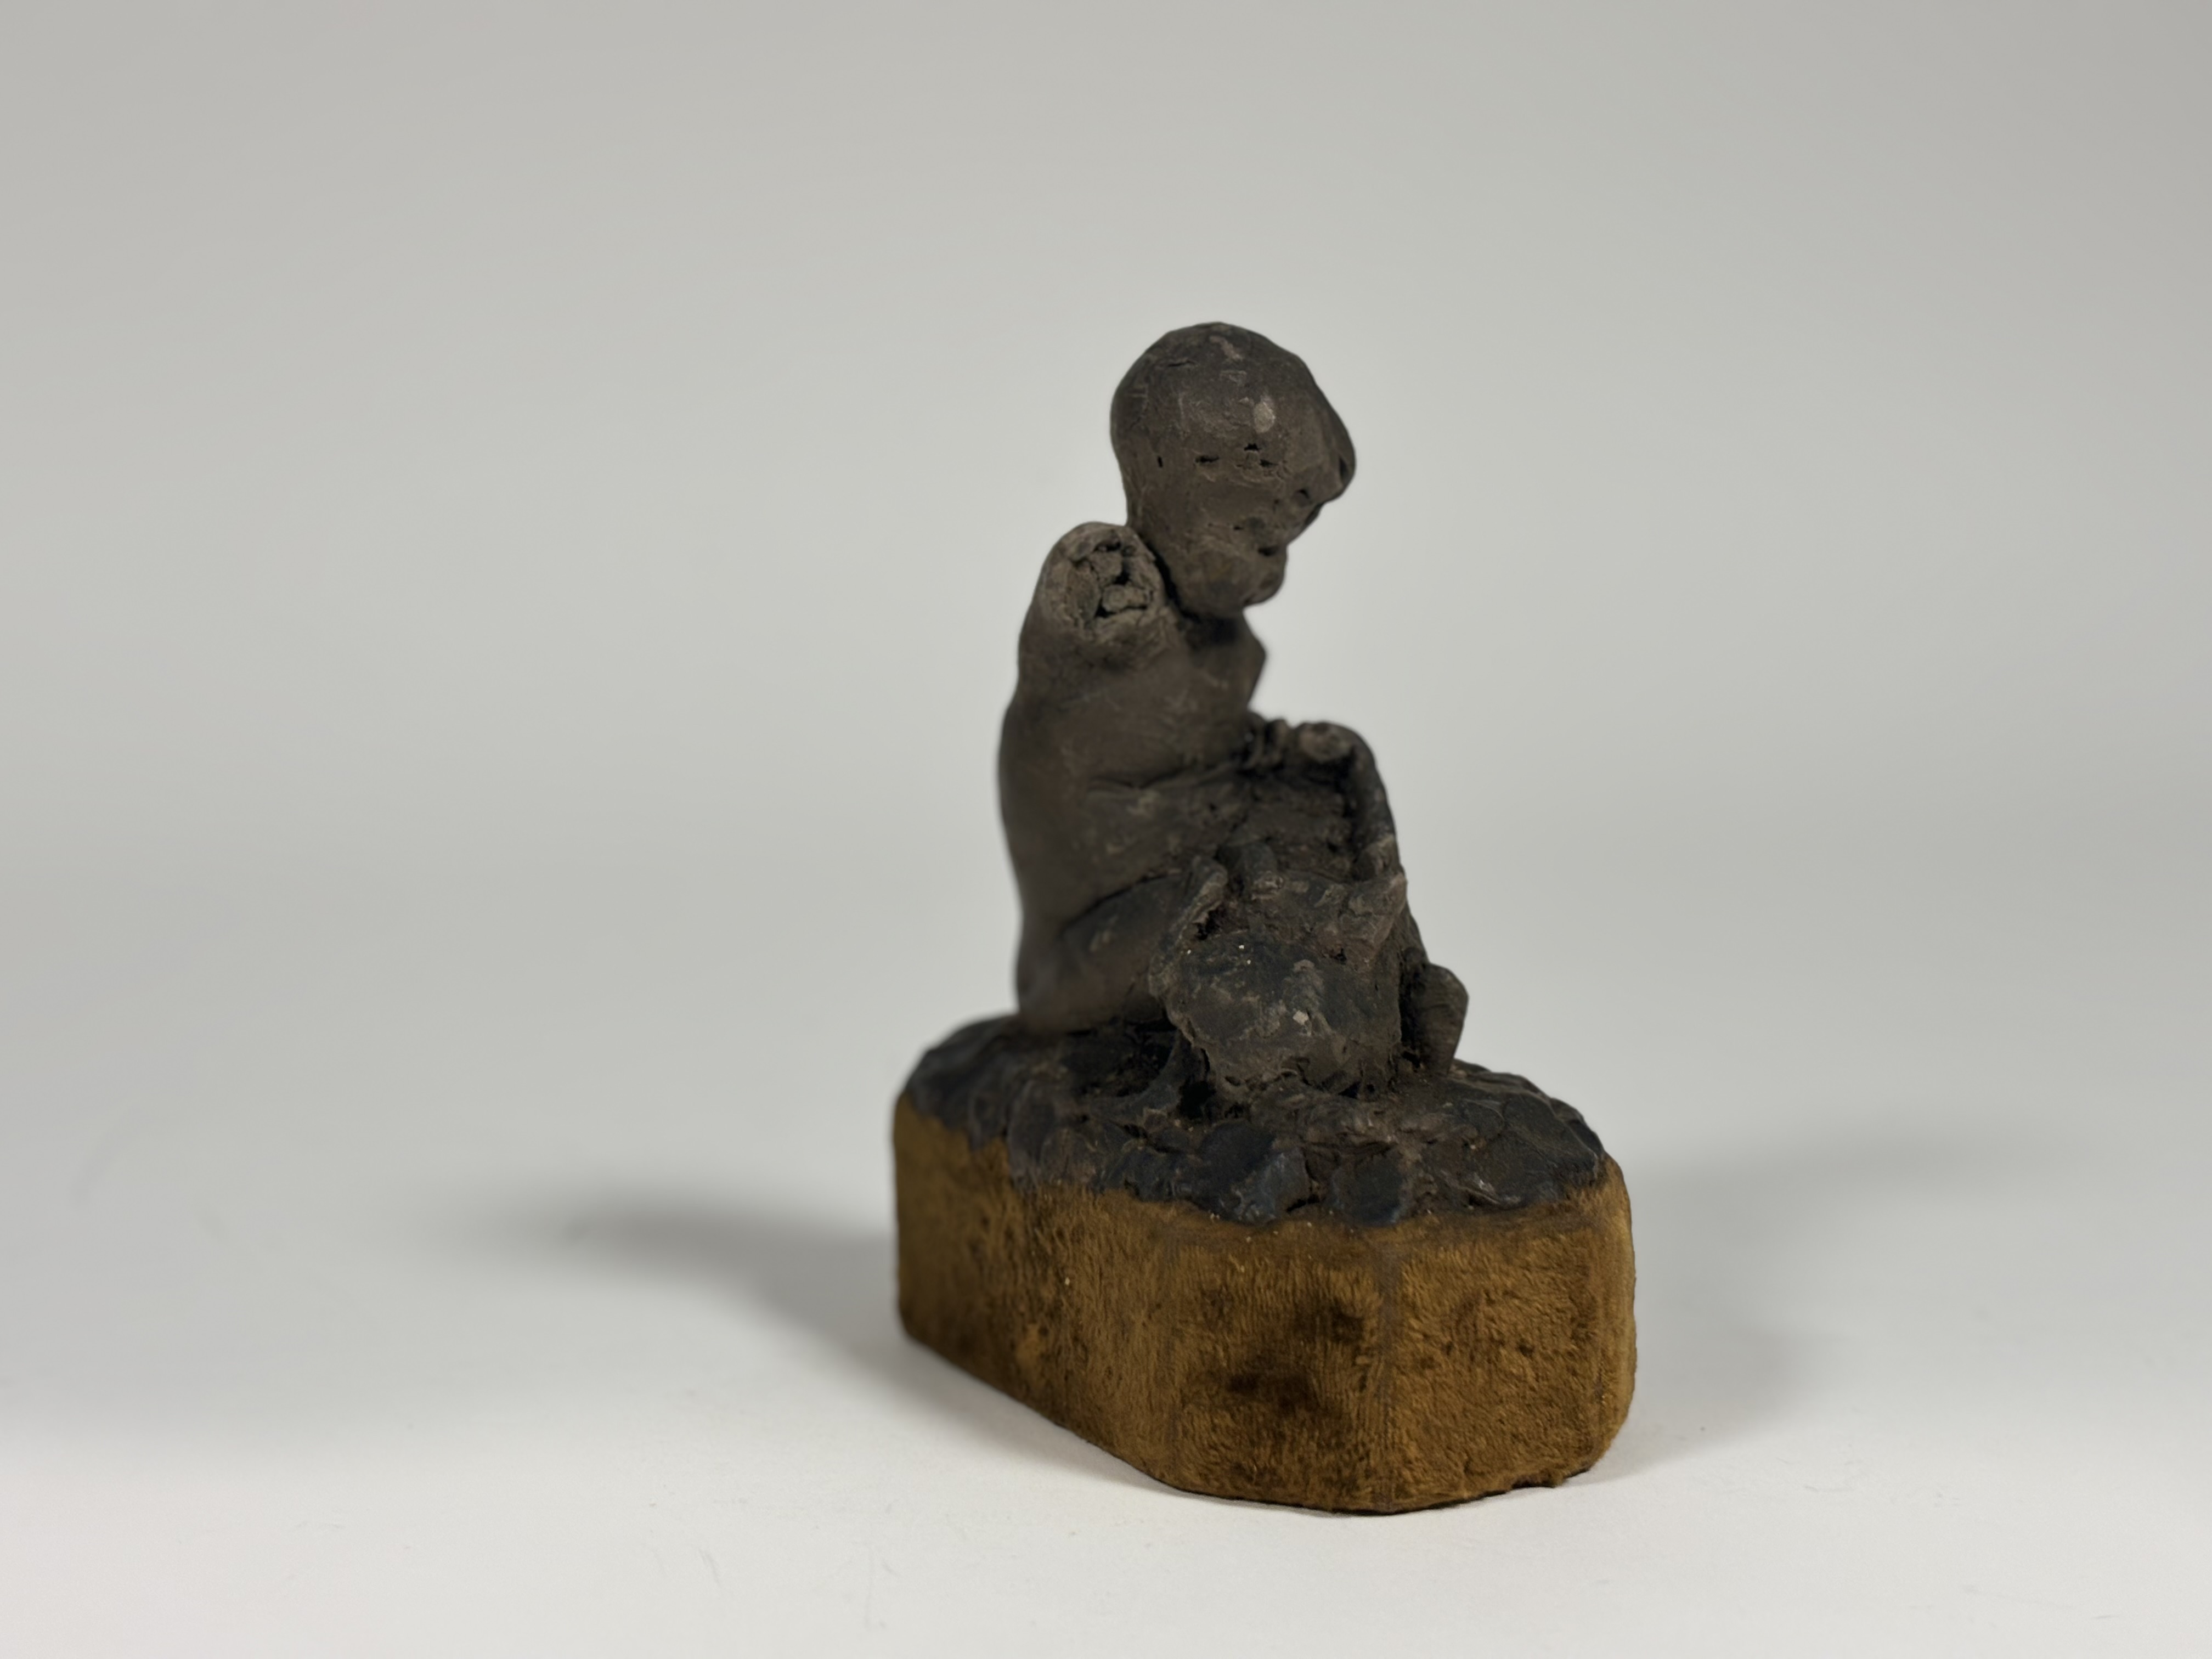 Attributed to Sophia Rosamond Praeger M.B.E. (Irish, 1867-1954), a wax maquette of a Child with a - Image 3 of 6